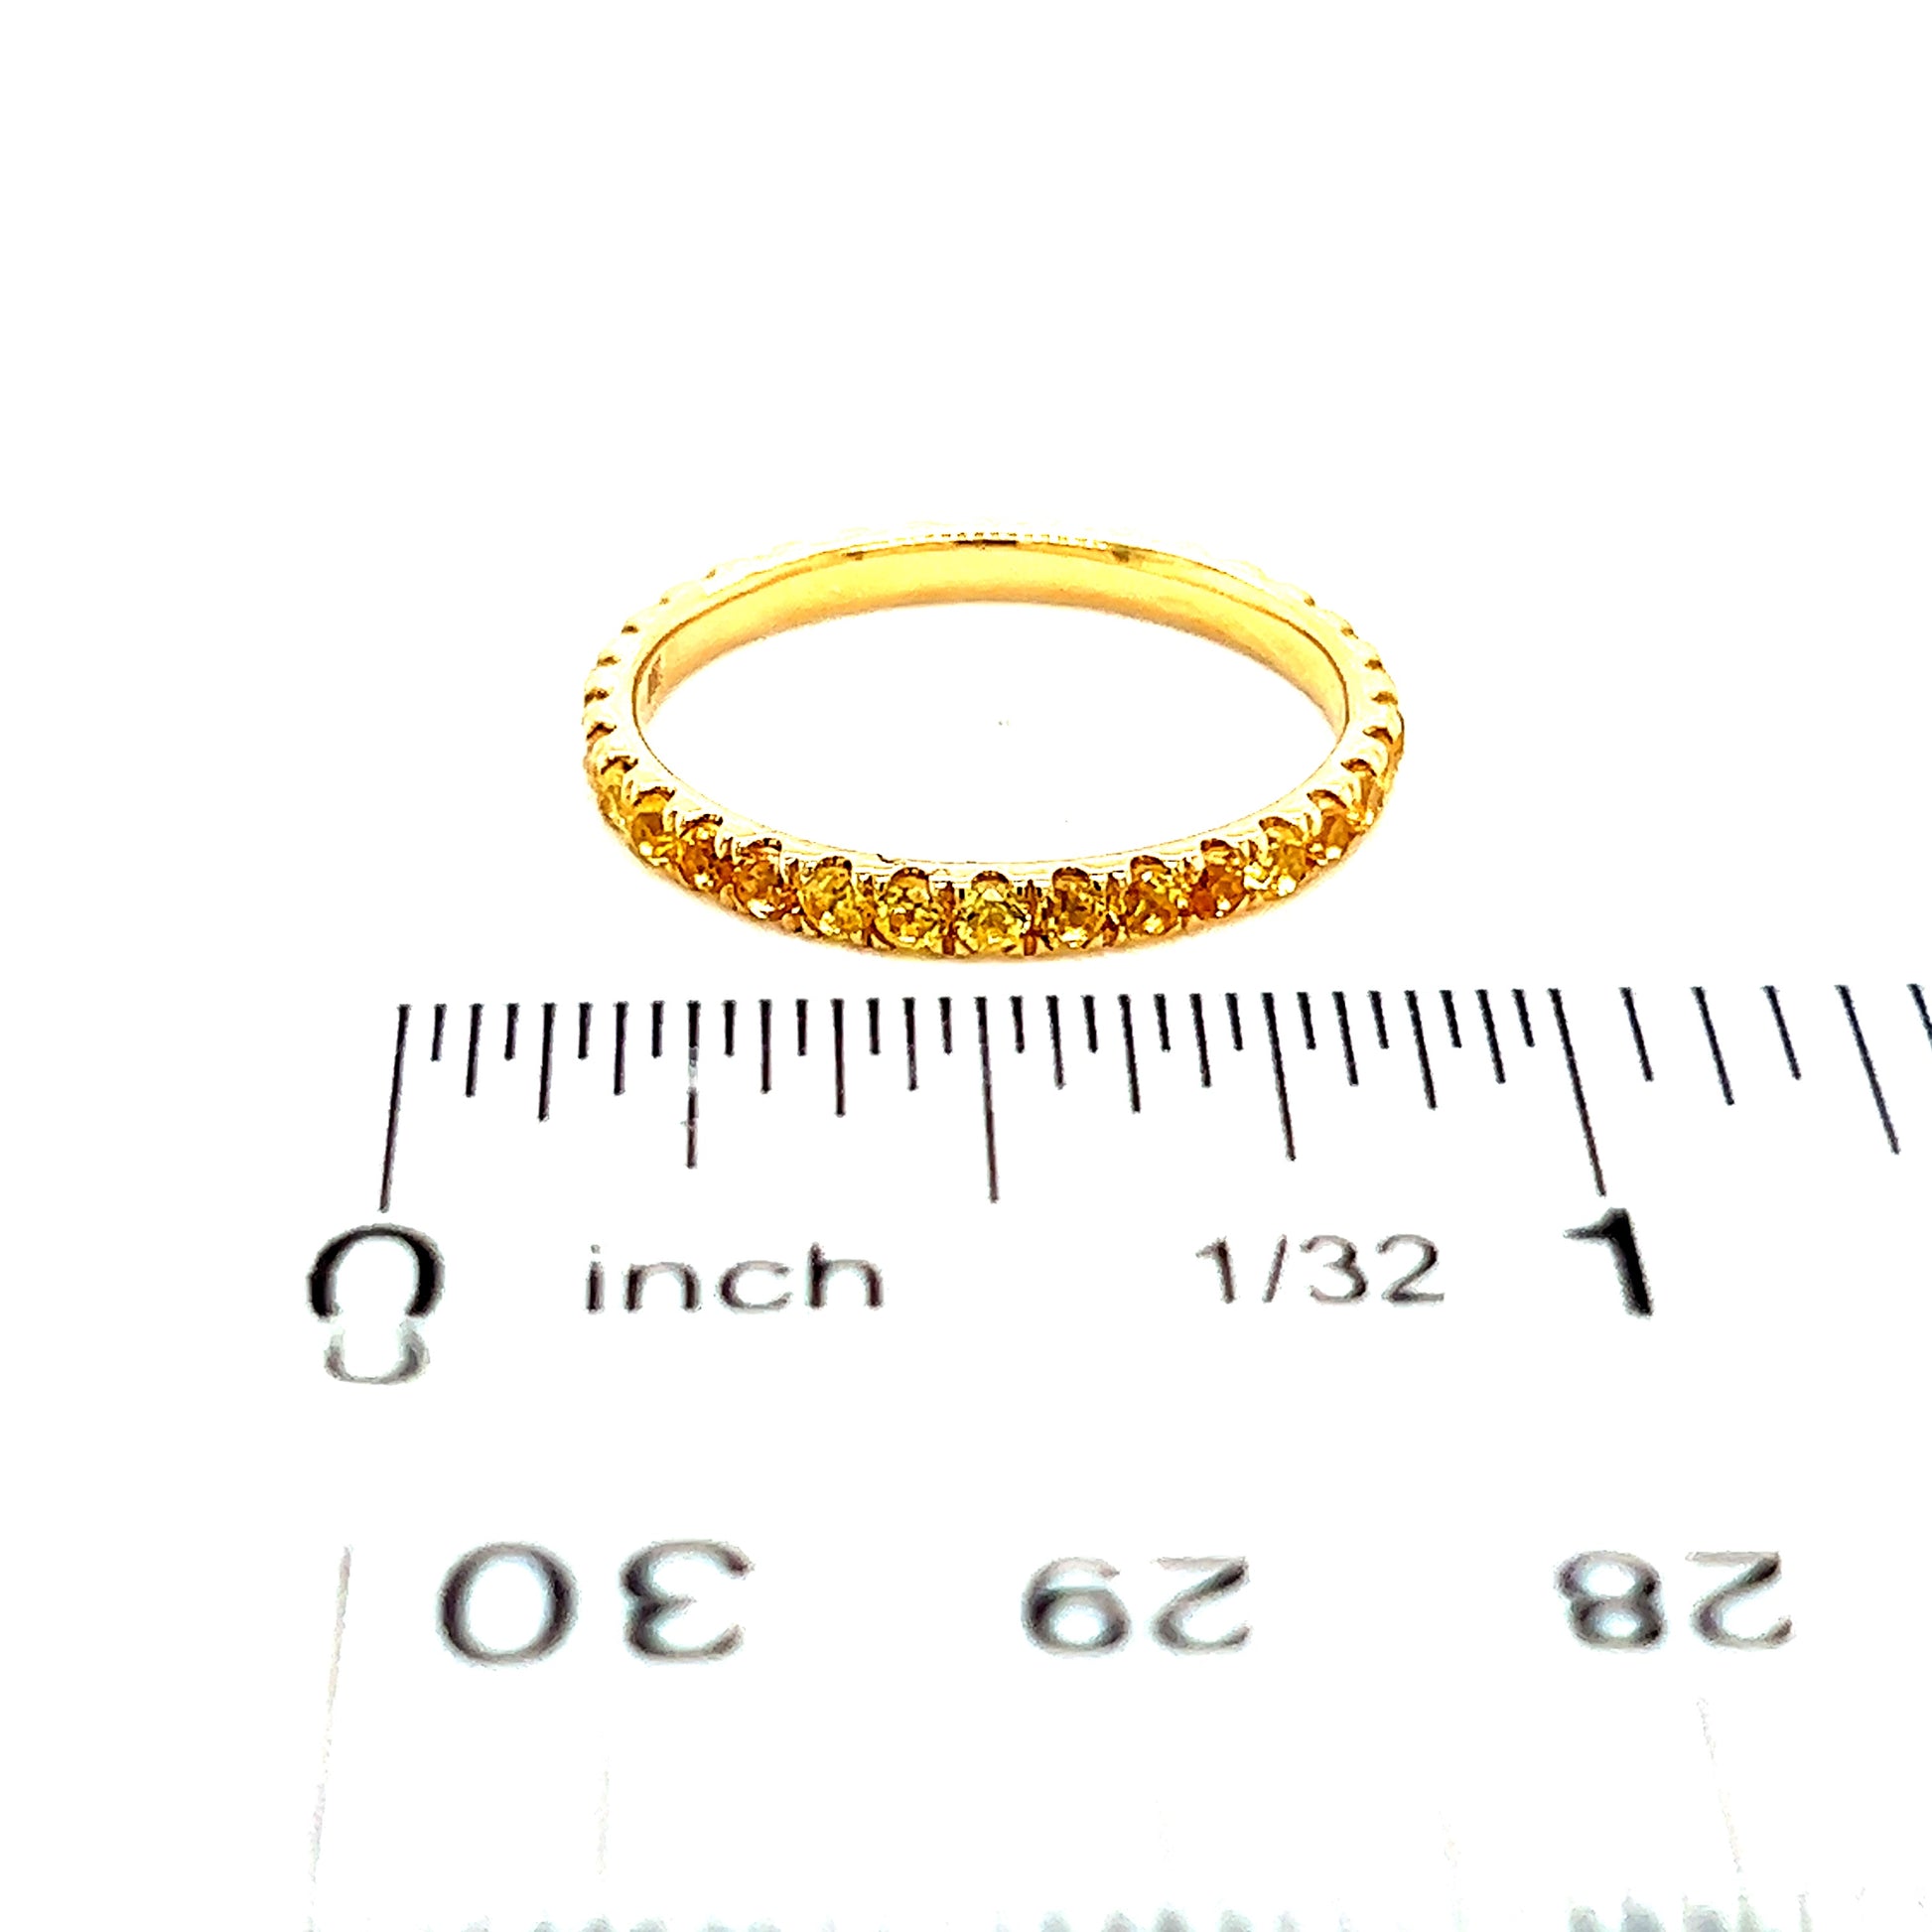 Natural Yellow Sapphire Ring 6.5 14k Y Gold 0.66 TCW Certified $1,190 217010 - Certified Fine Jewelry